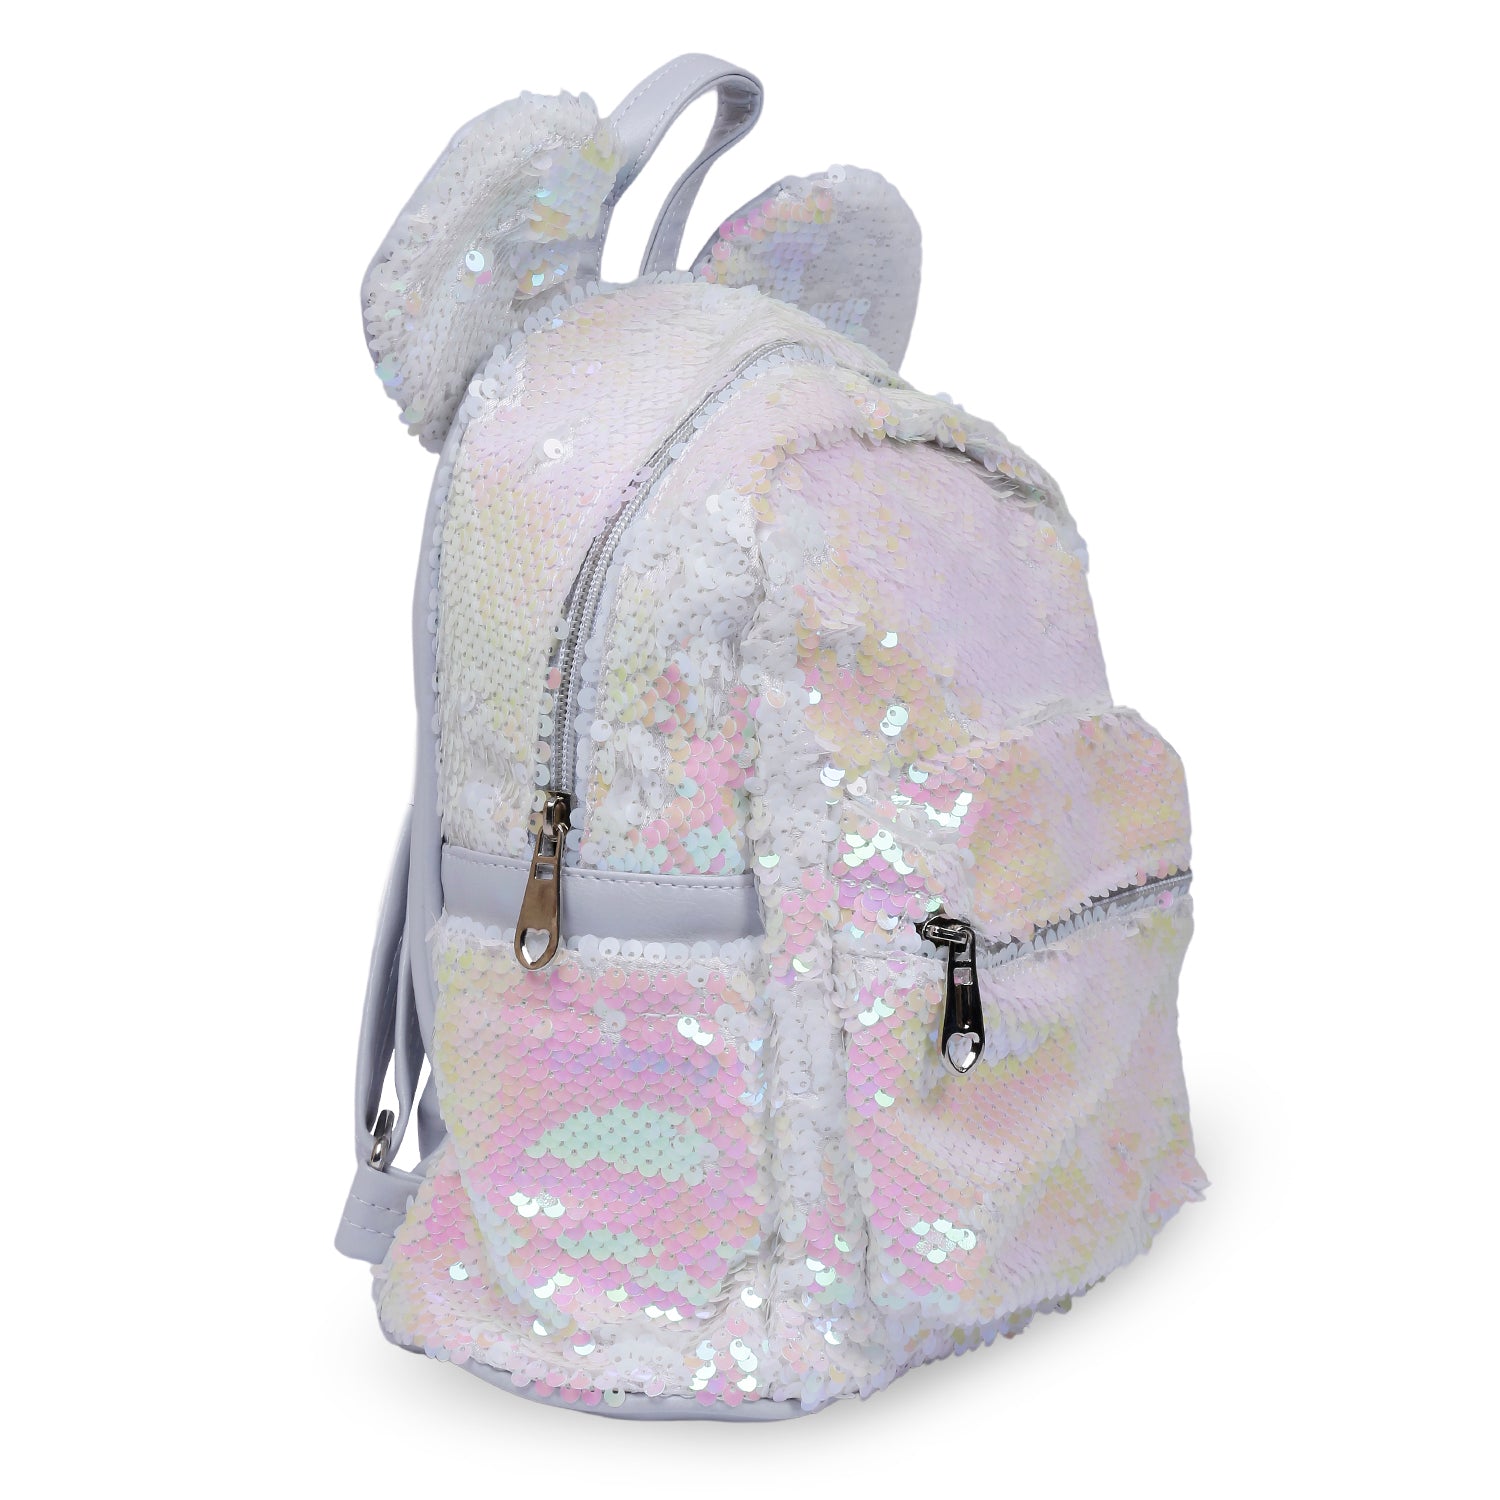 Sequined Dual Tone Backpack Trendy Bag - White, Pink - Baby Moo